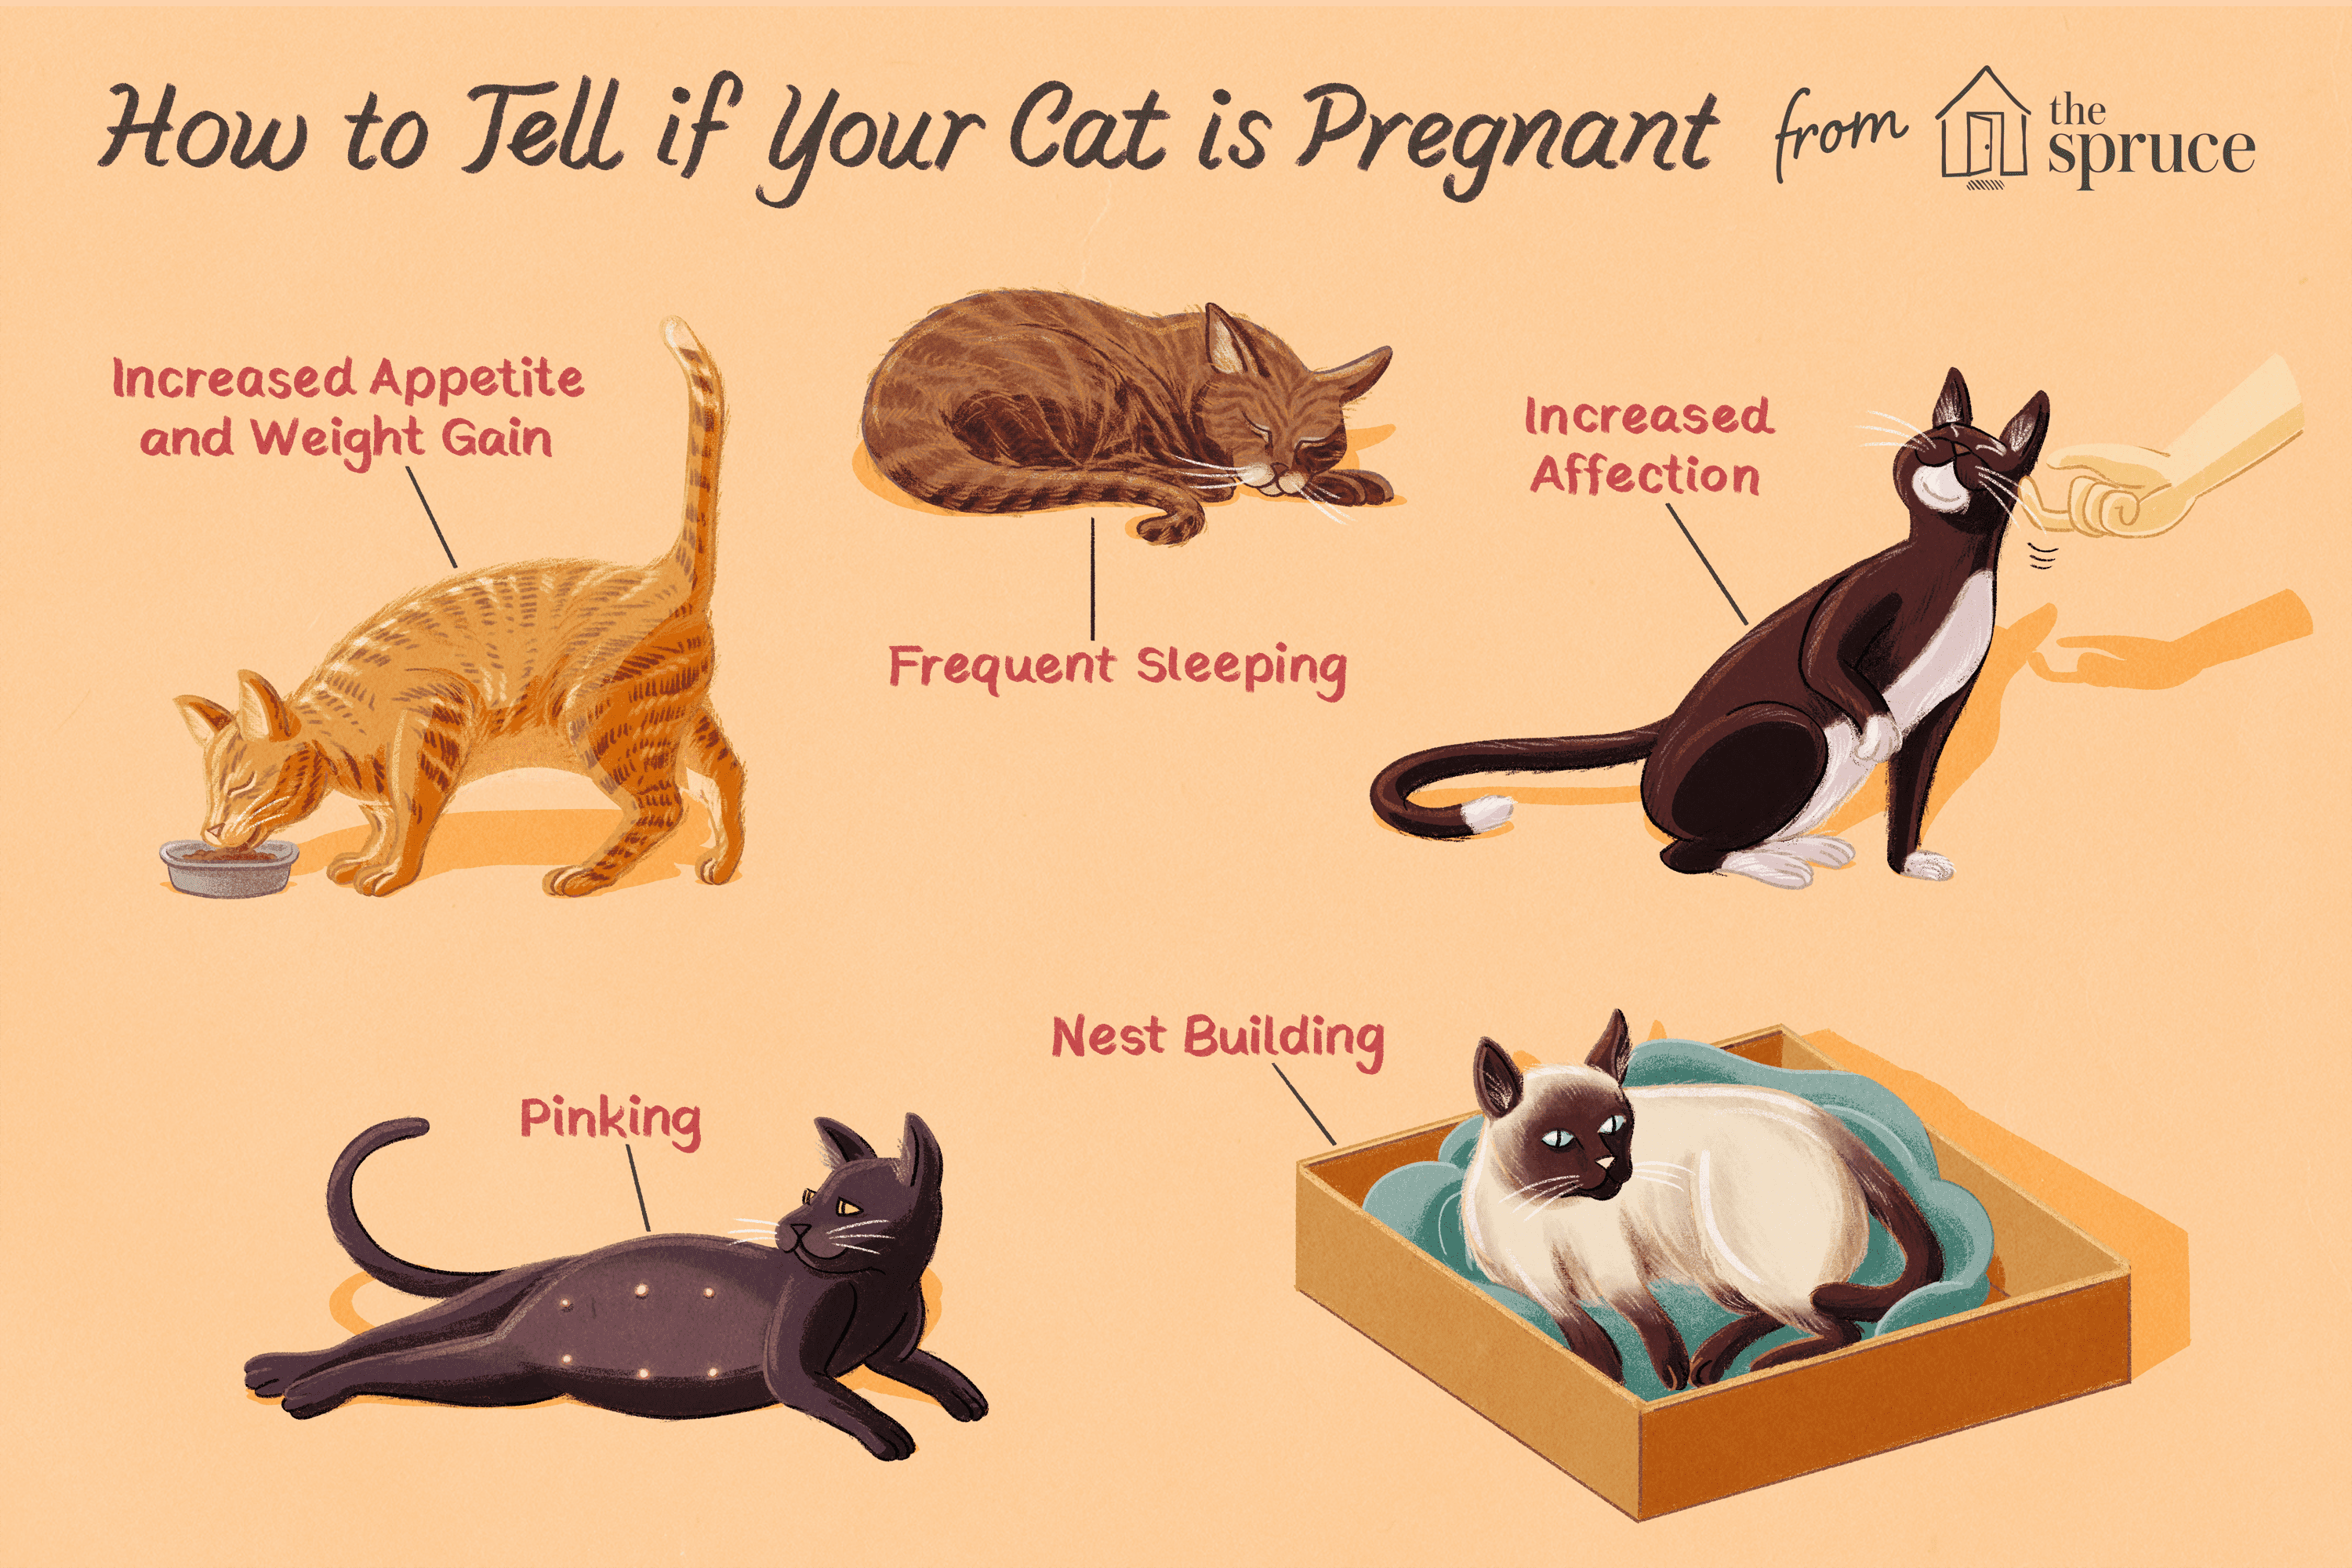 How Can I Tell If My Cat Is Pregnant?